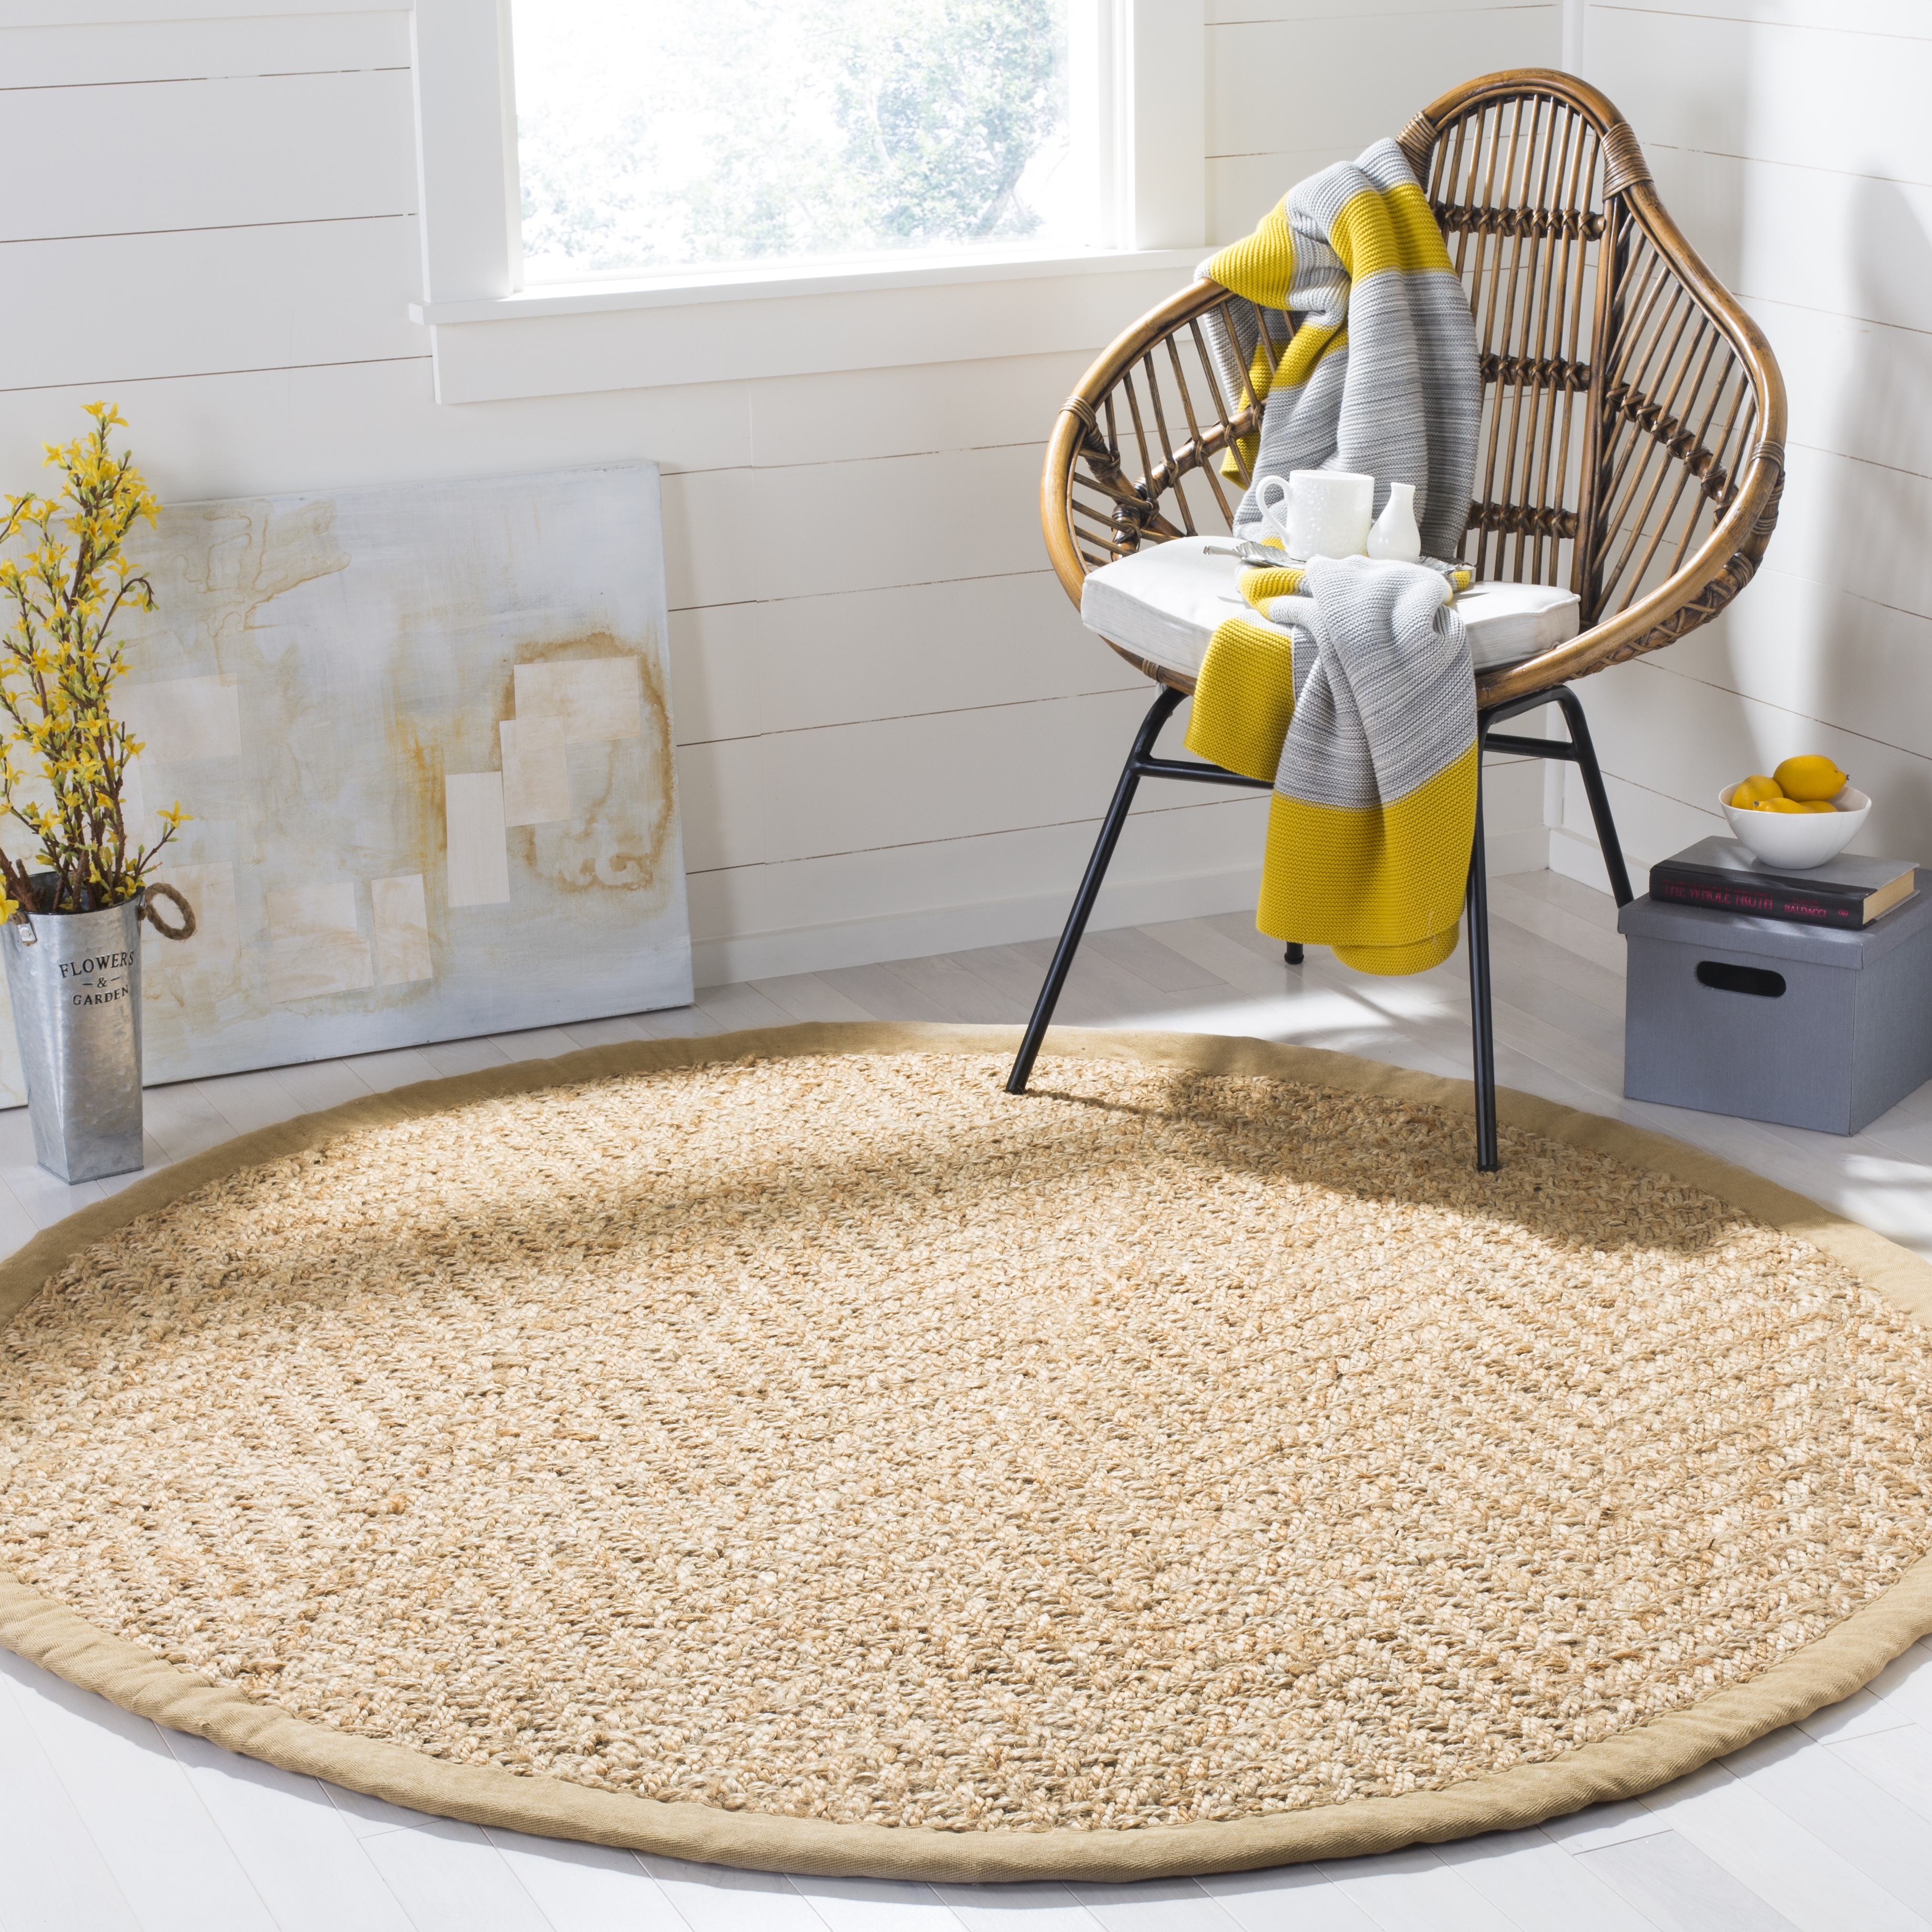 Arlo Home Hand Woven Area Rug, NF265A, Natural,  8' X 8' Round - Image 1